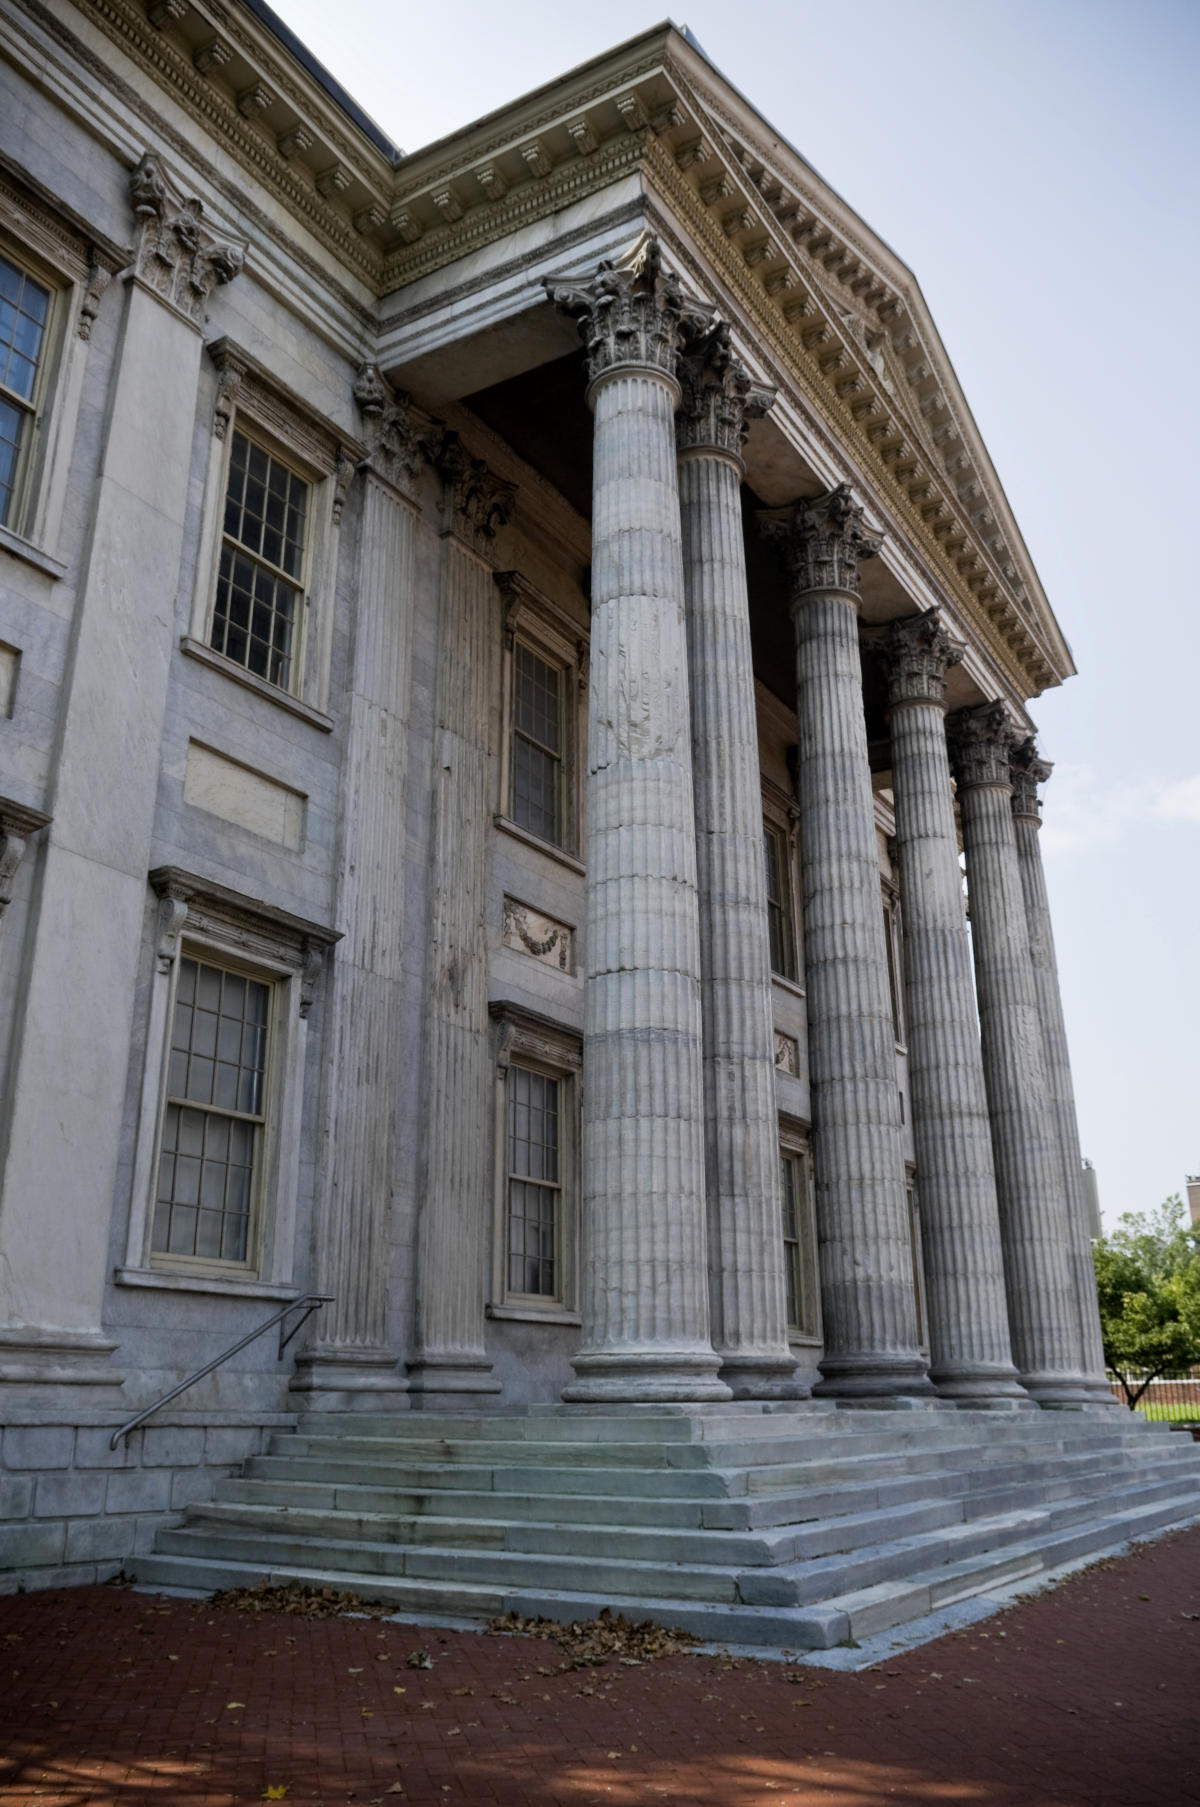 Banking Business. The facade of a bank building of Roman architecture. The entrance is a gallery under a high cornice held by six Corinthian columns.